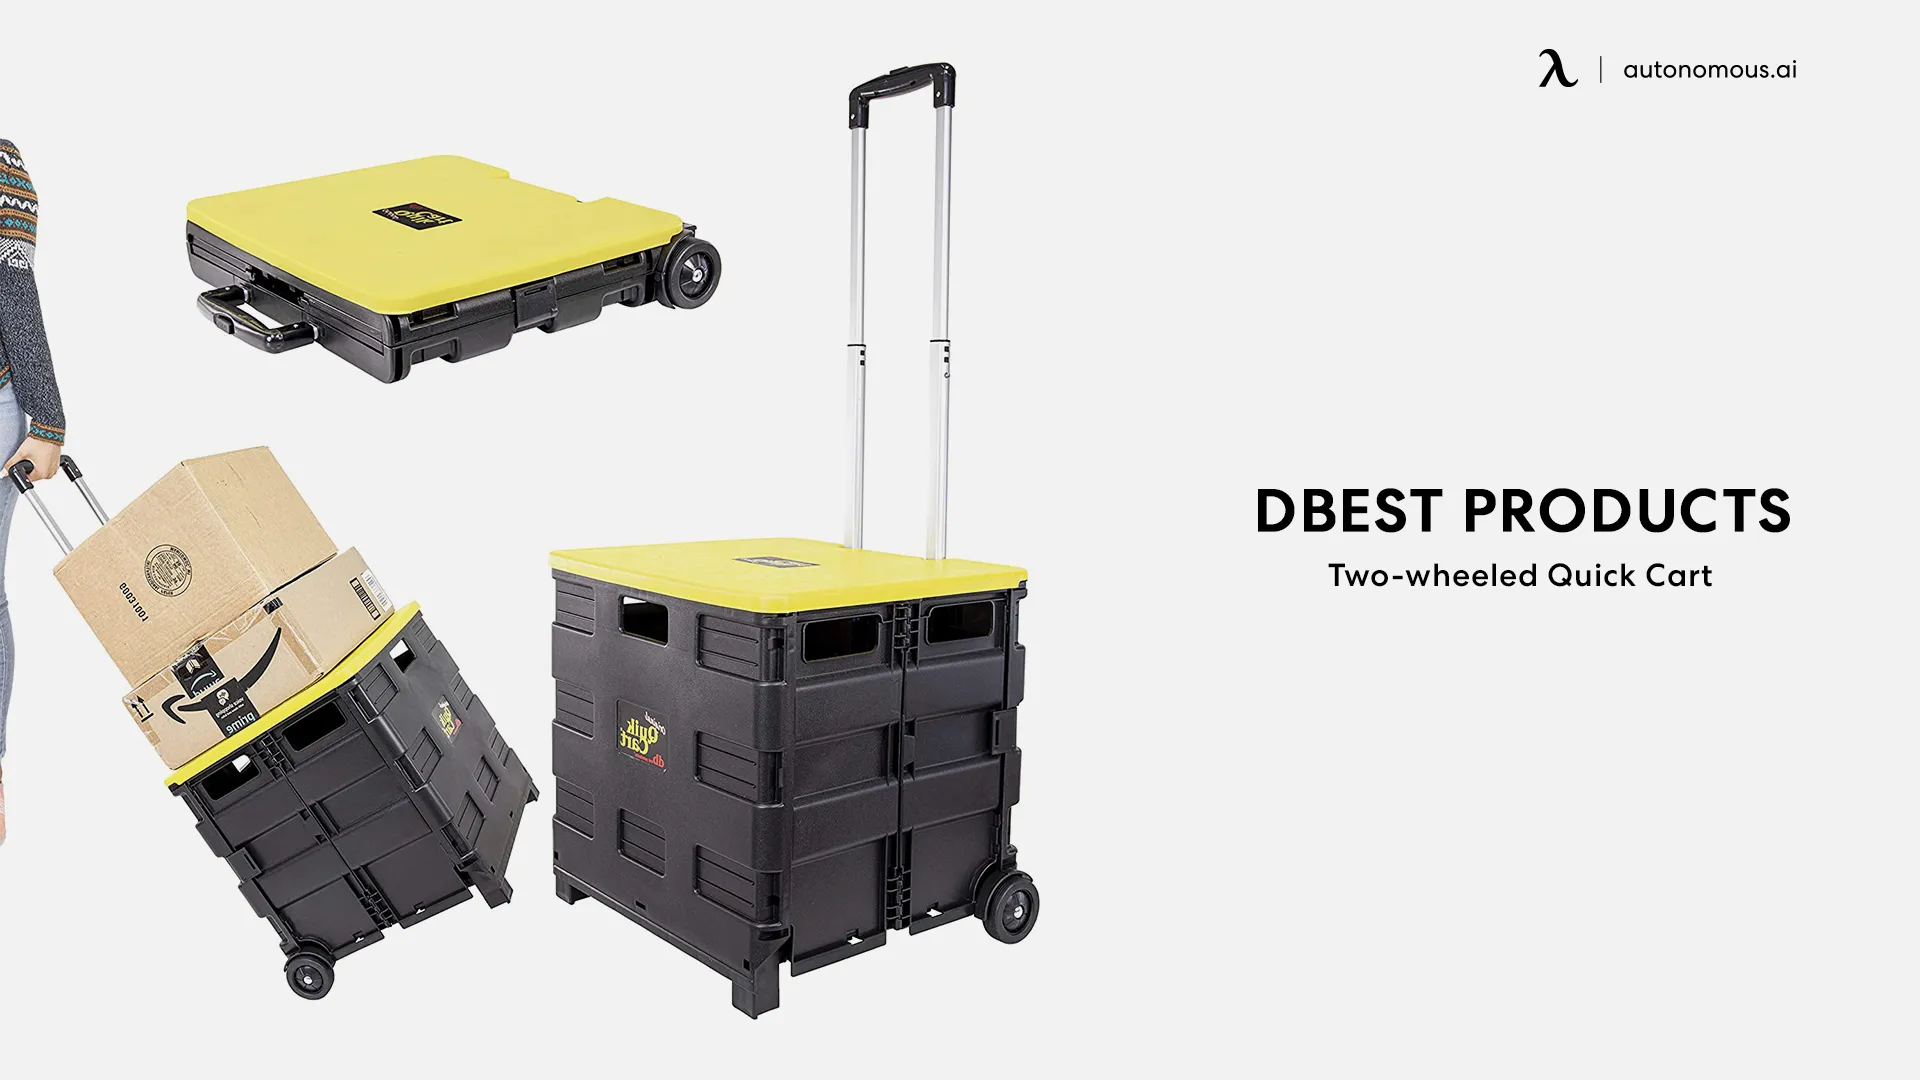 Dbest Products’ Two-wheeled Quick Cart with Collapsible Handcart